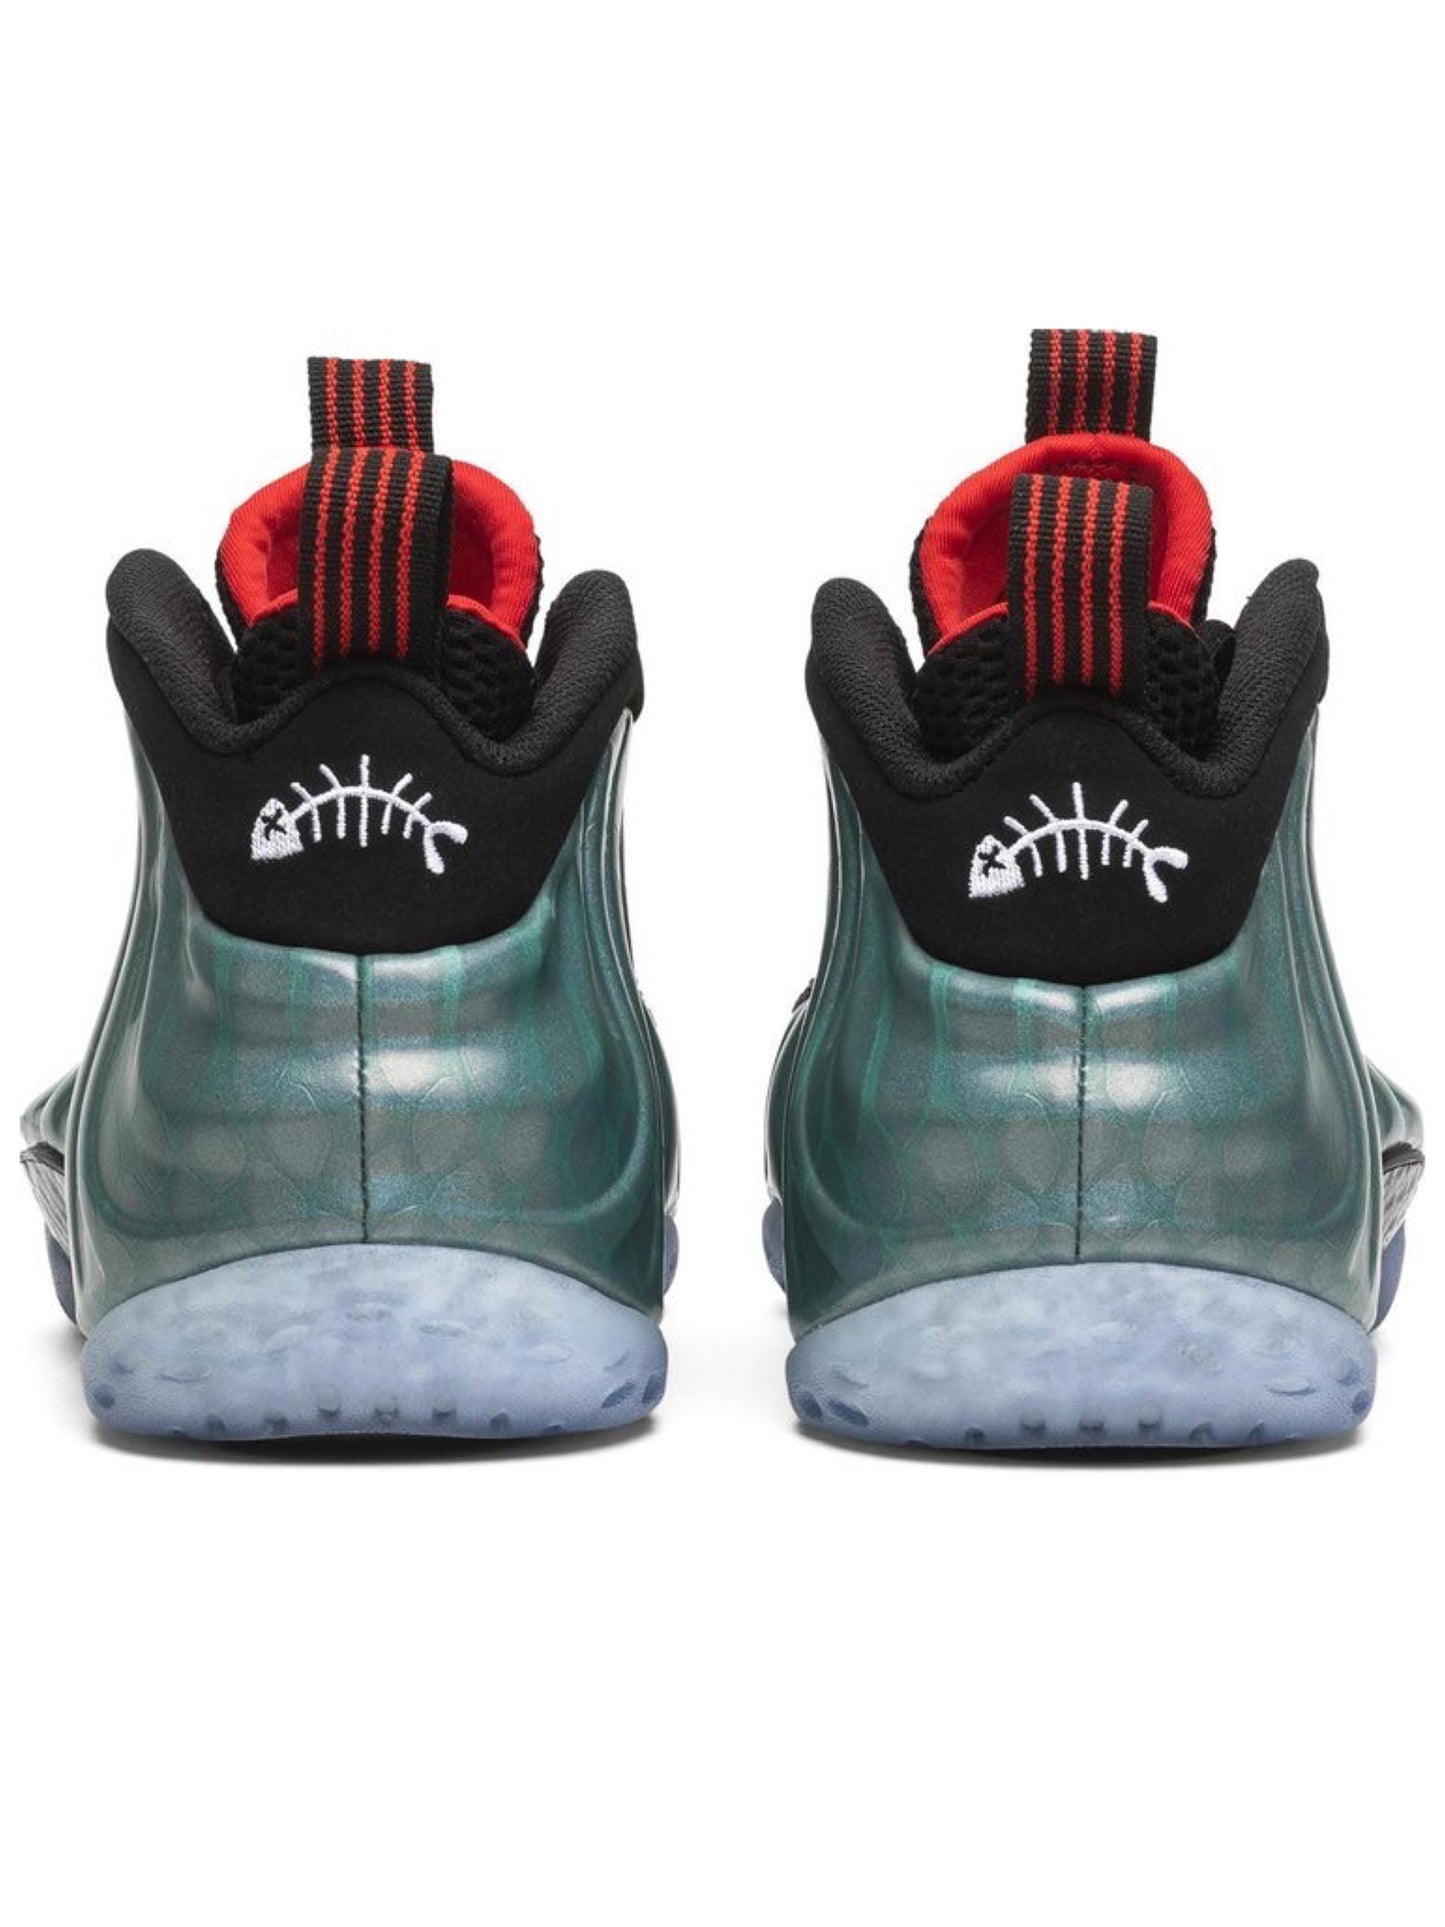 Air Foamposite One Fishing 575420-300